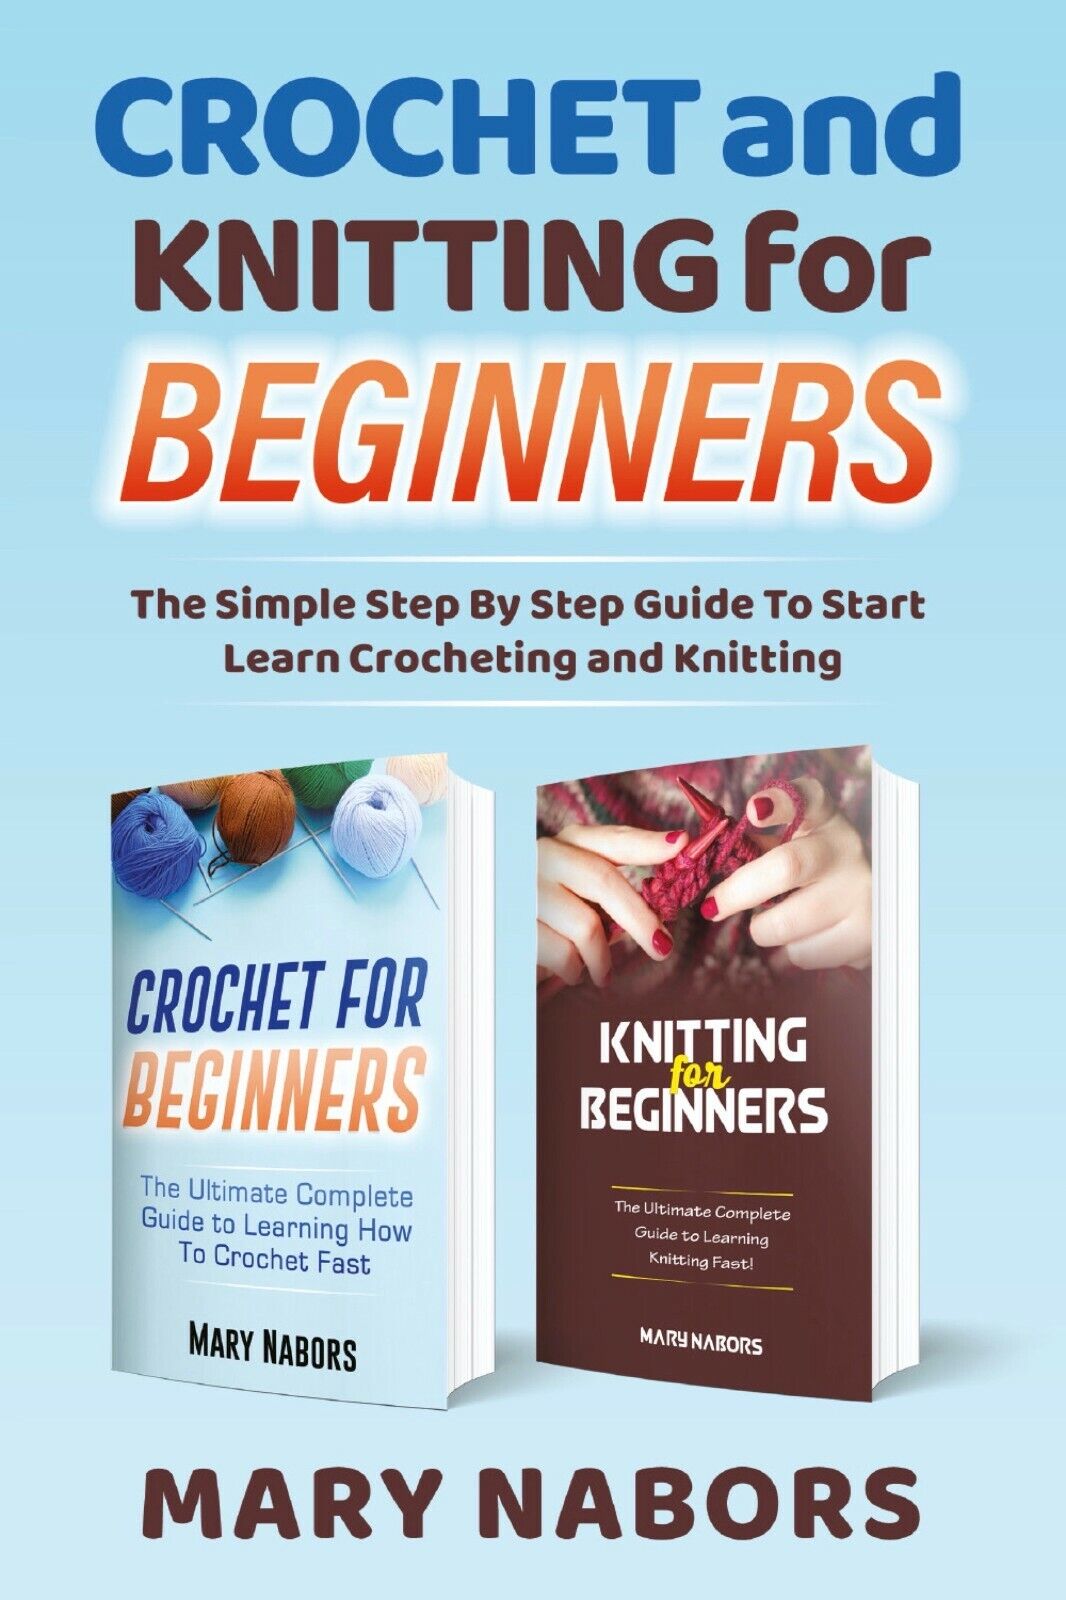 Crochet and Knitting for Beginners di Mary Nabors,  2021,  Youcanprint libro usato